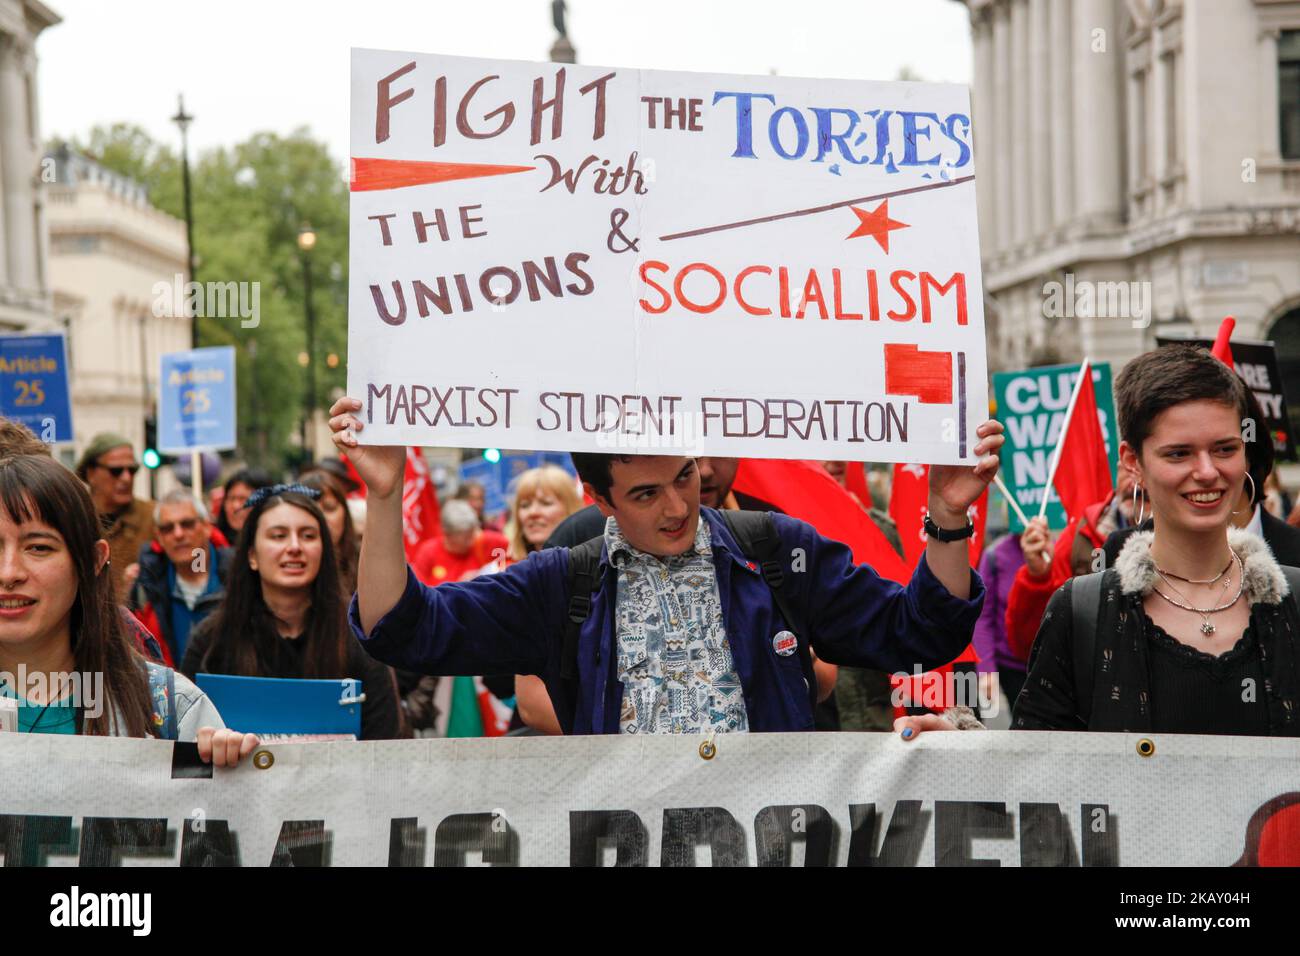 Students take part at a demonstration organised by the Trades Union Congress (TUC) calling for a new deal for working people in central London on May 12, 2018. - The TUC called for a national demonstration on May 12 to demand an end to the government's austerity policies and better rights for all in the workplace. (Photo by Alex Cavendish/NurPhoto) Stock Photo